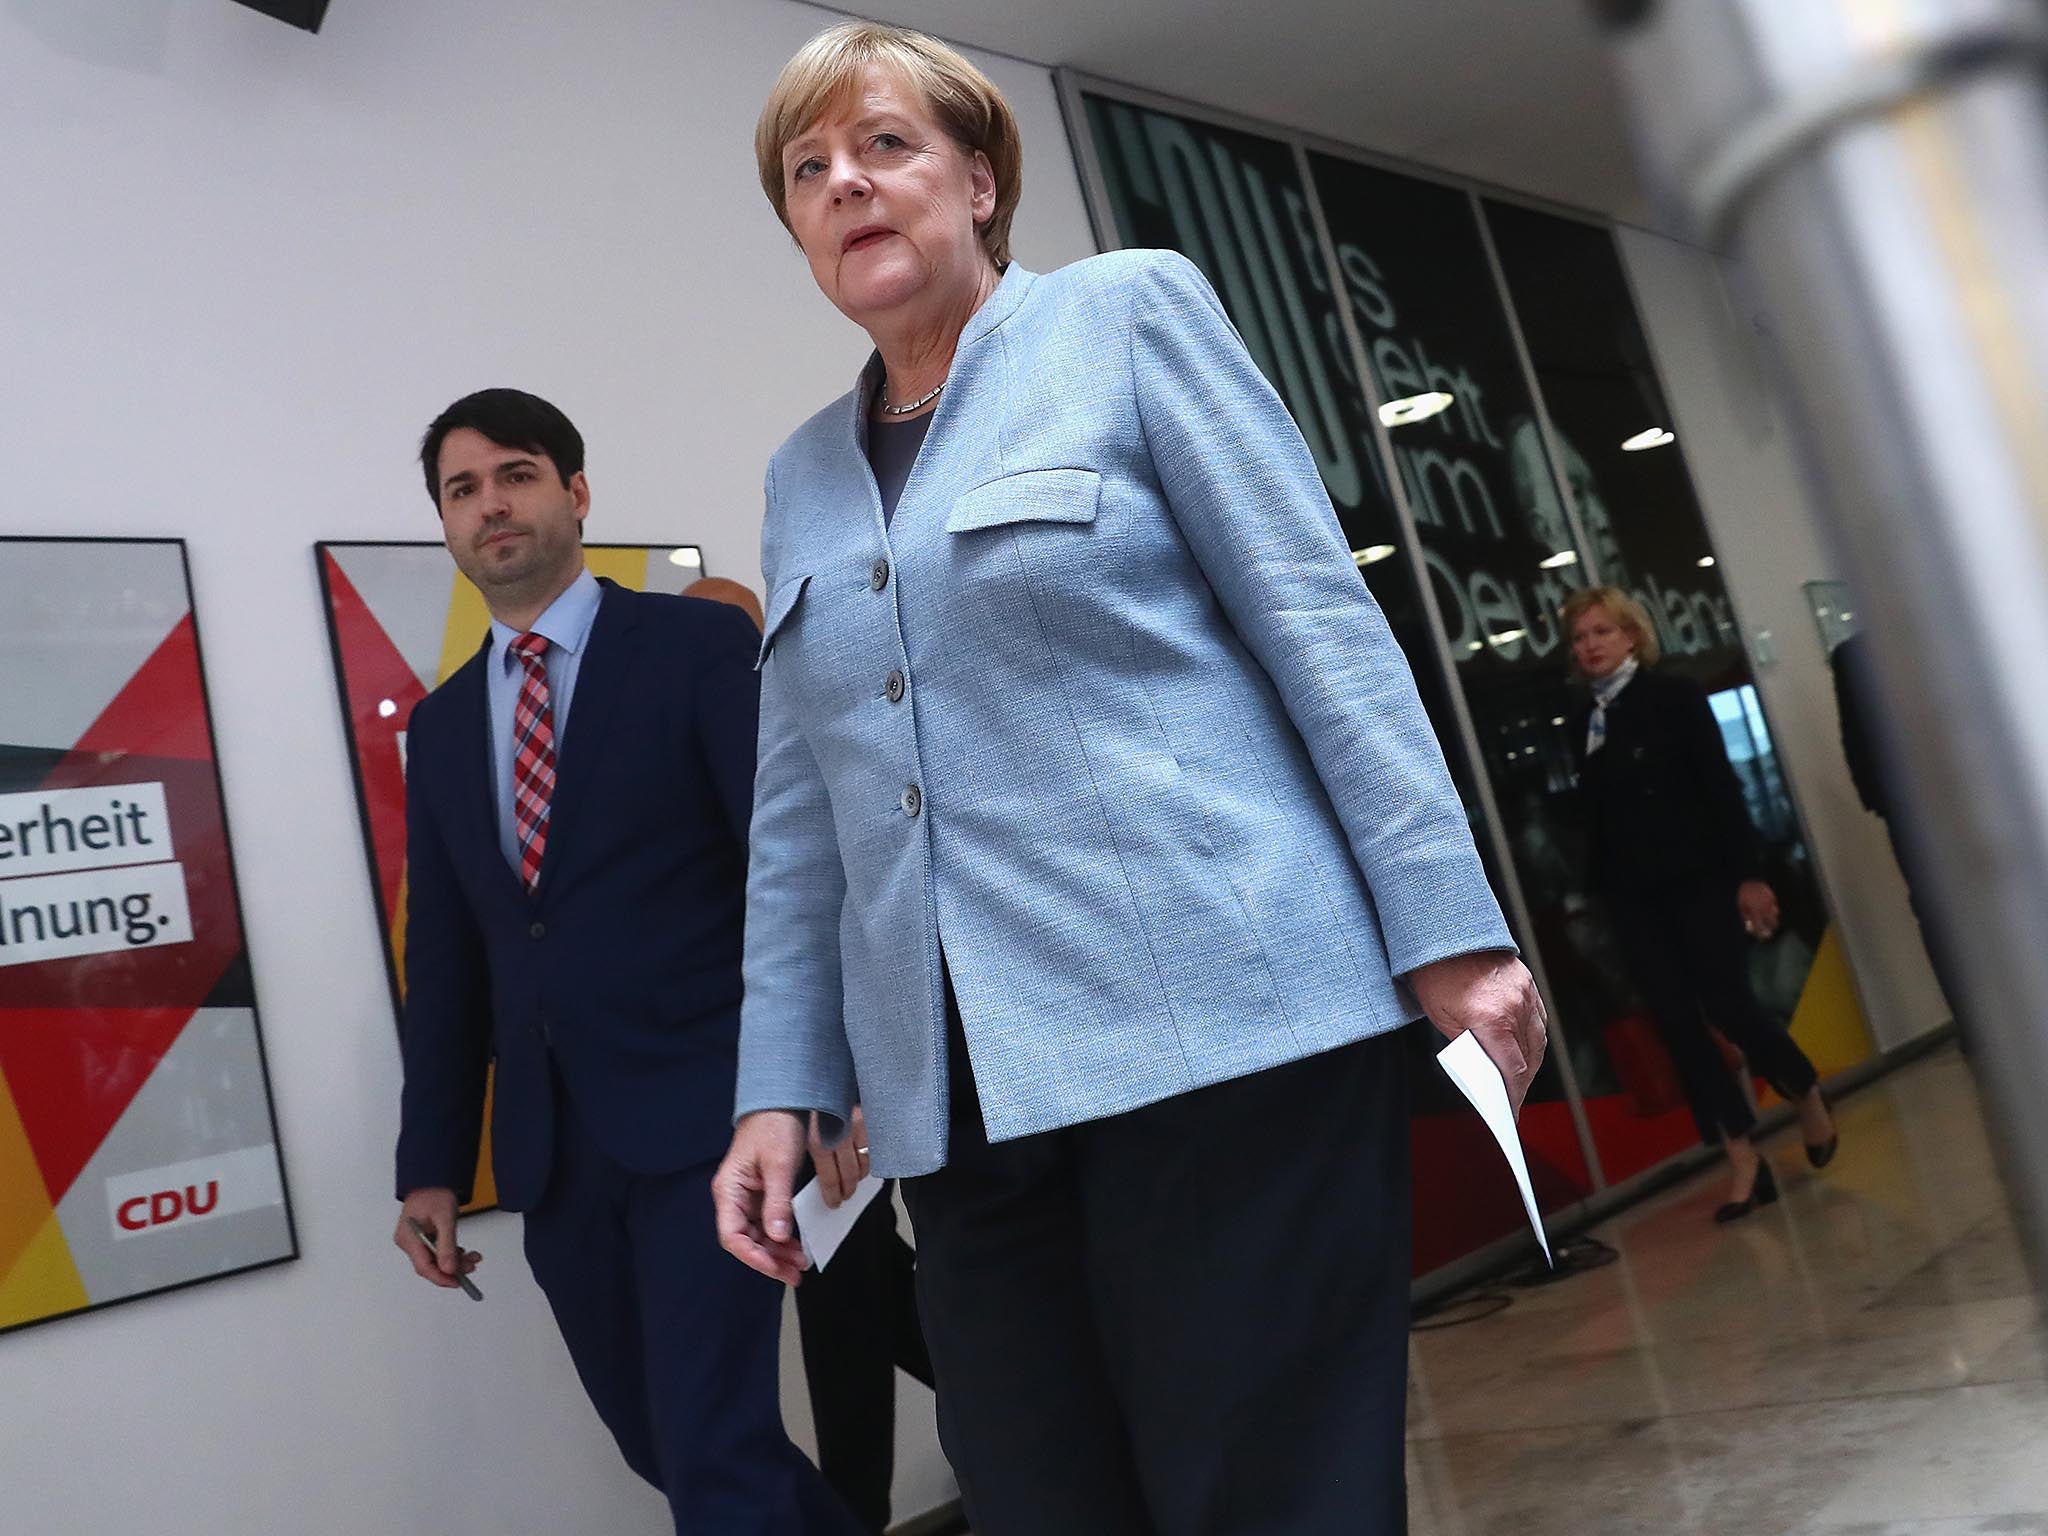 Angela Merkel won the German election, but by a much smaller margin than before